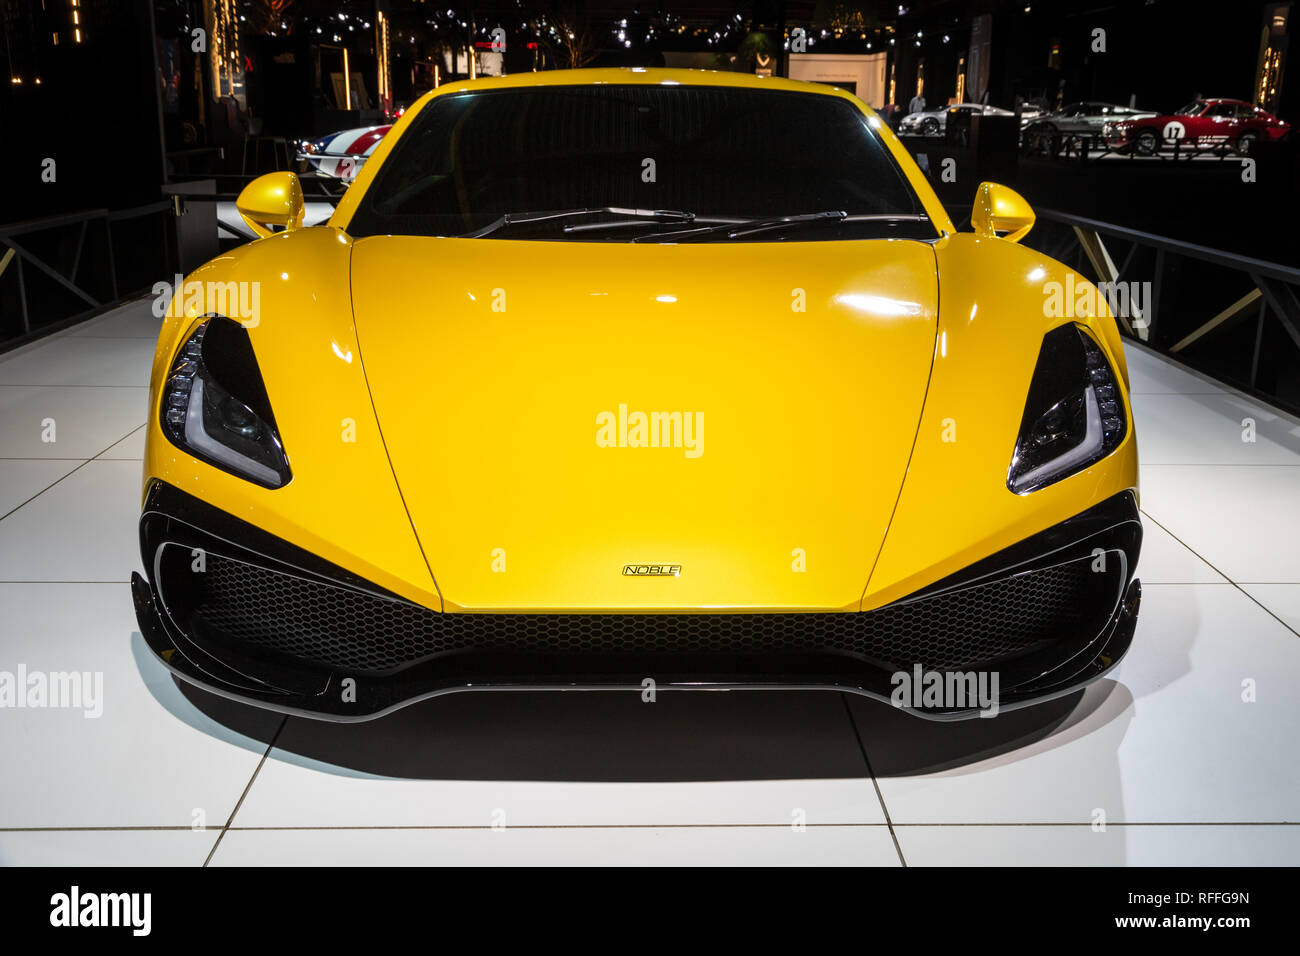 BRUSSELS - JAN 18, 2019: Noble M500 sports car showcased at the 97th Brussels Motor Show 2019 Autosalon. Stock Photo